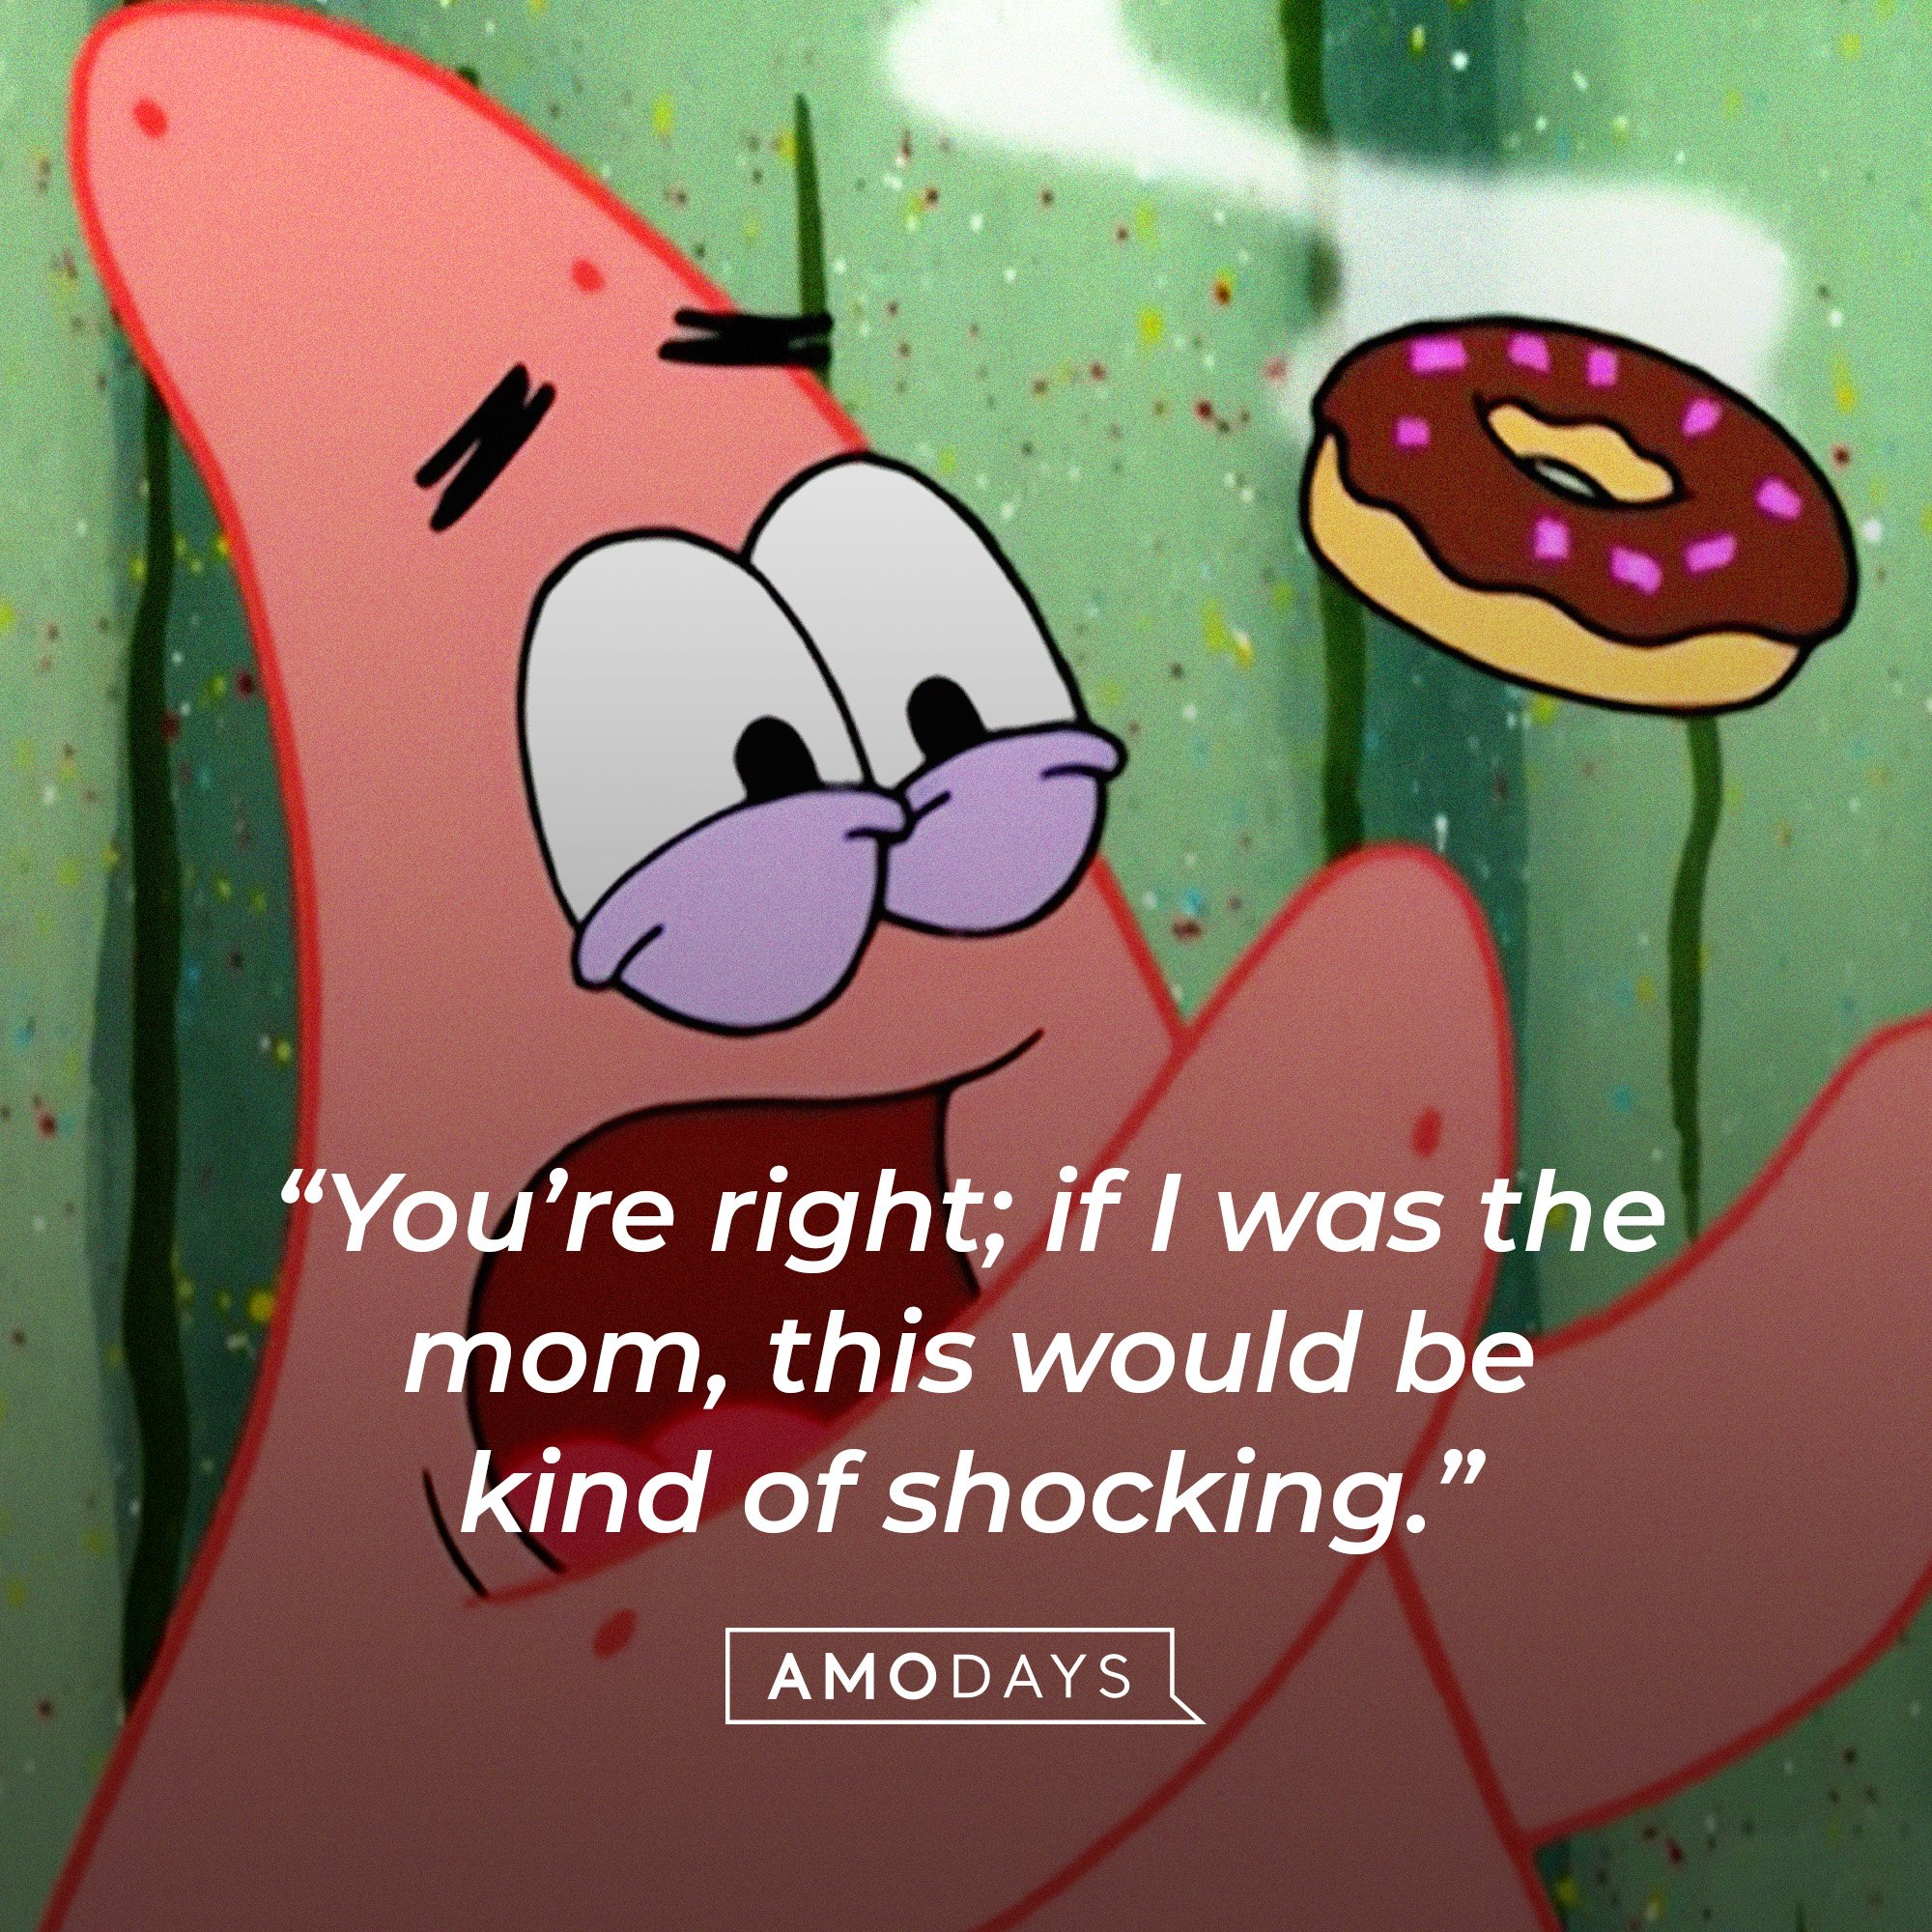 Patrick Star’s quote: “You’re right; if I was the mom, this would be kind of shocking.” | Image: AmoDays